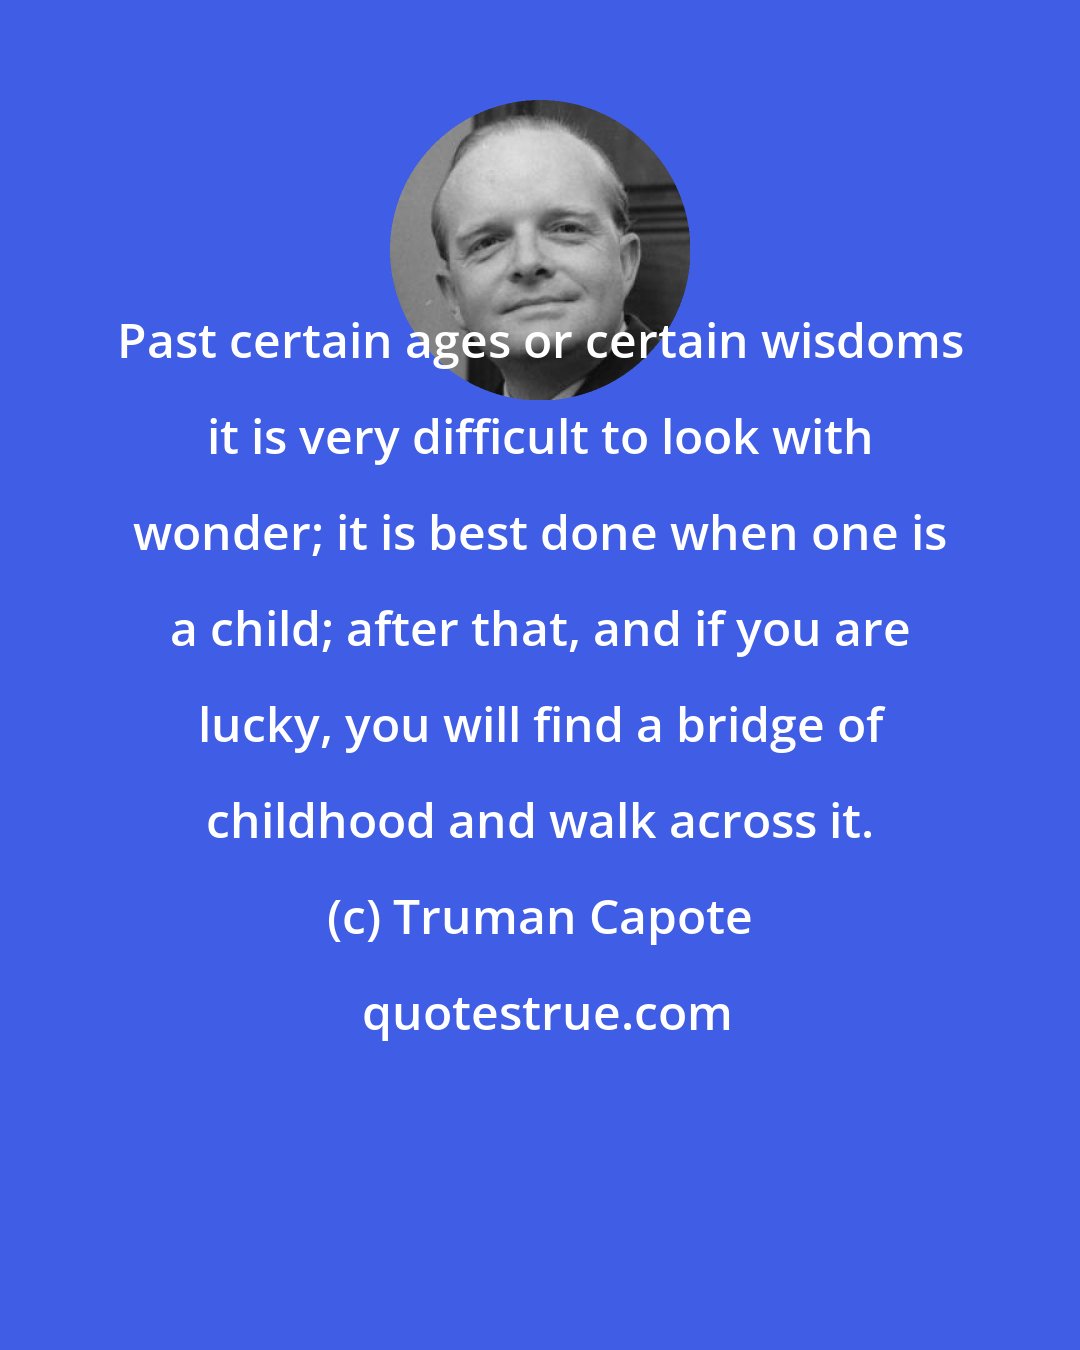 Truman Capote: Past certain ages or certain wisdoms it is very difficult to look with wonder; it is best done when one is a child; after that, and if you are lucky, you will find a bridge of childhood and walk across it.